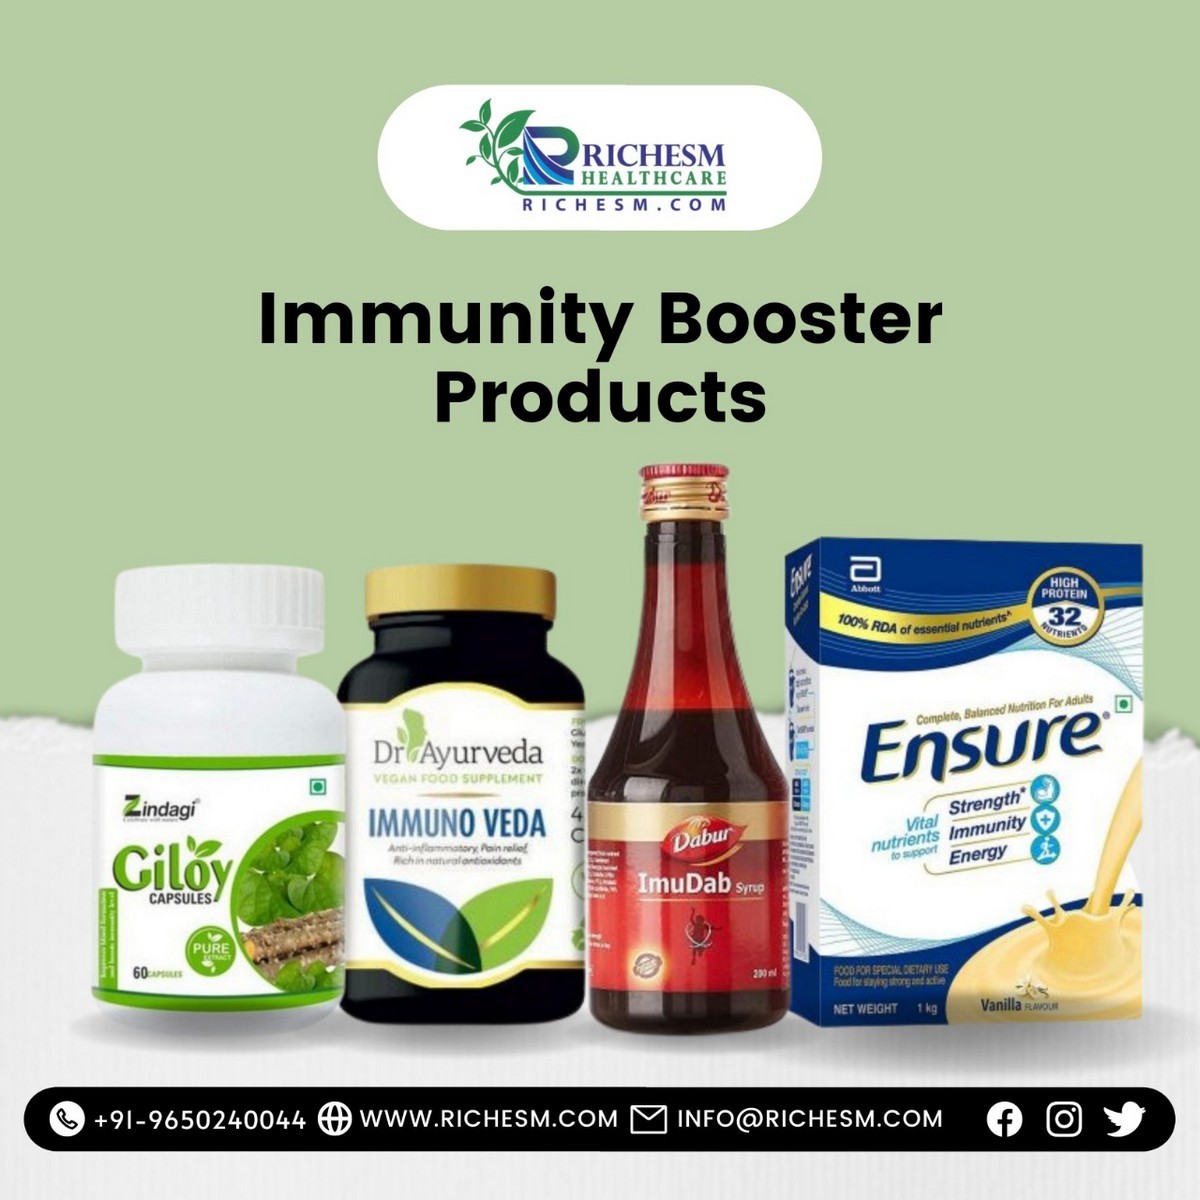 RichesM Complete Immunity Booster Health Products